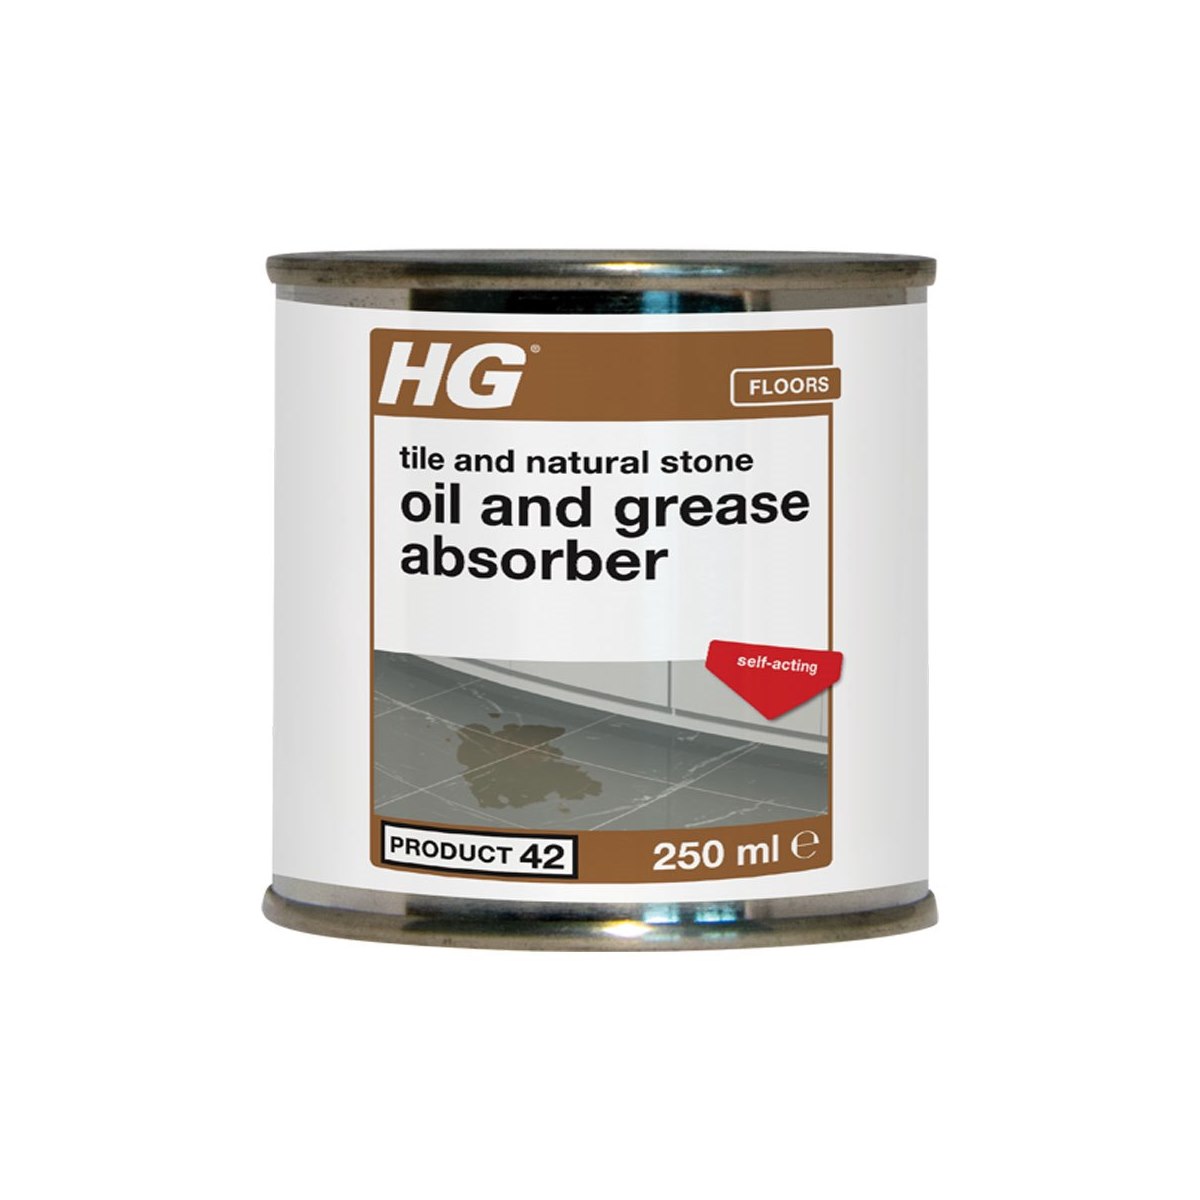 HG Natural Stone Oil and Grease Absorber (Product 42) 250ml